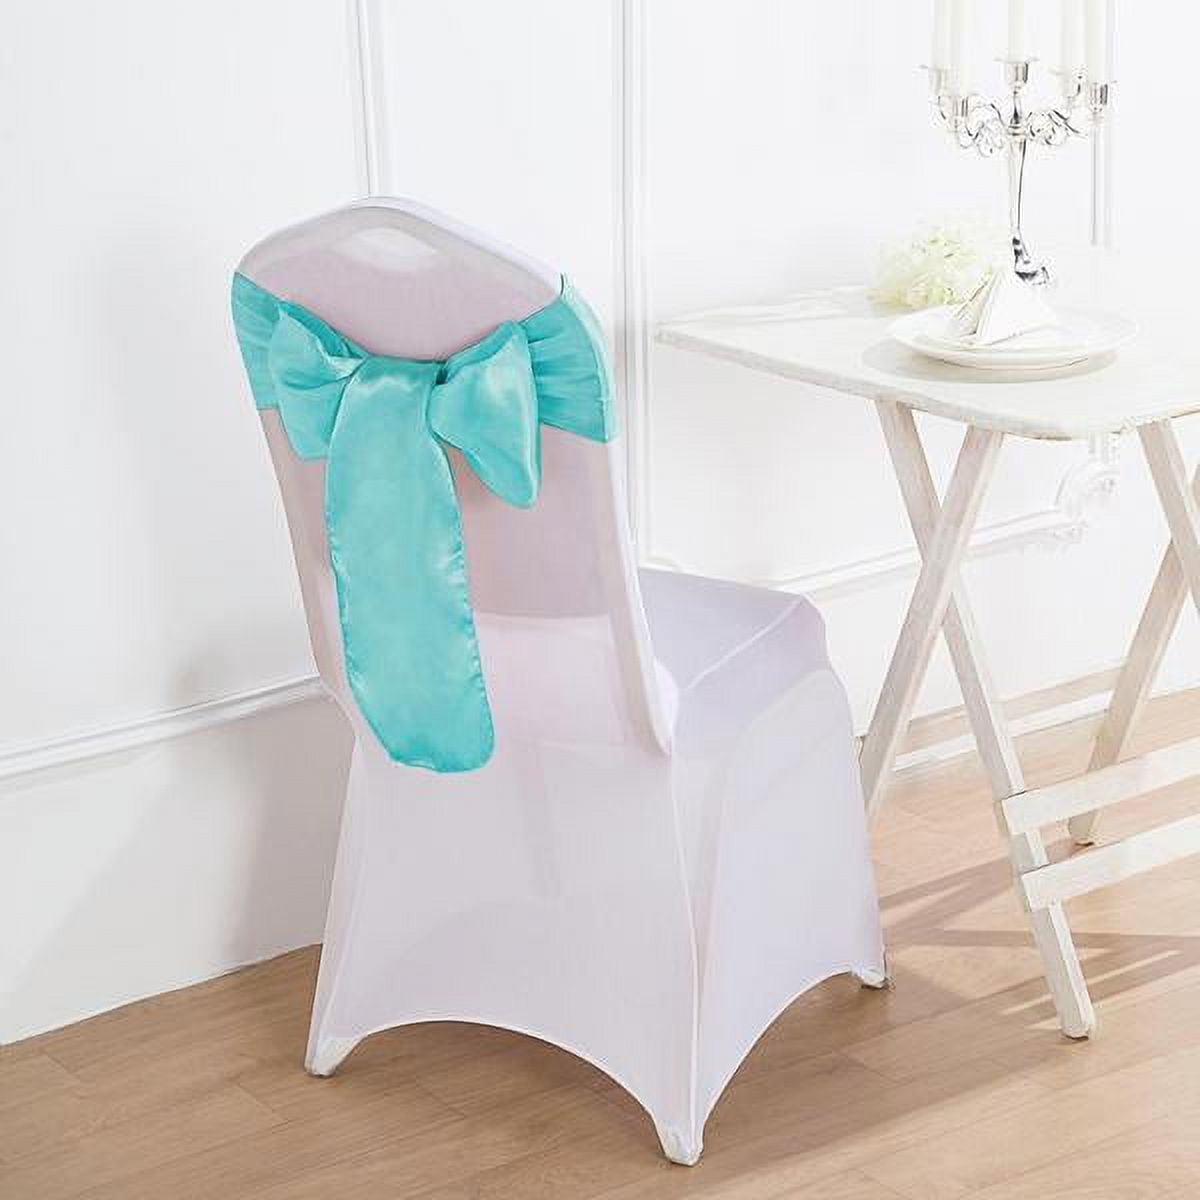 New Coming Sunflower Crystal Tulle Hand Made Wedding Supplies Cute  Beautiful Wedding Decoratiopn Chair Sash Covers Ncaaf From Irish_bridal,  $4.33